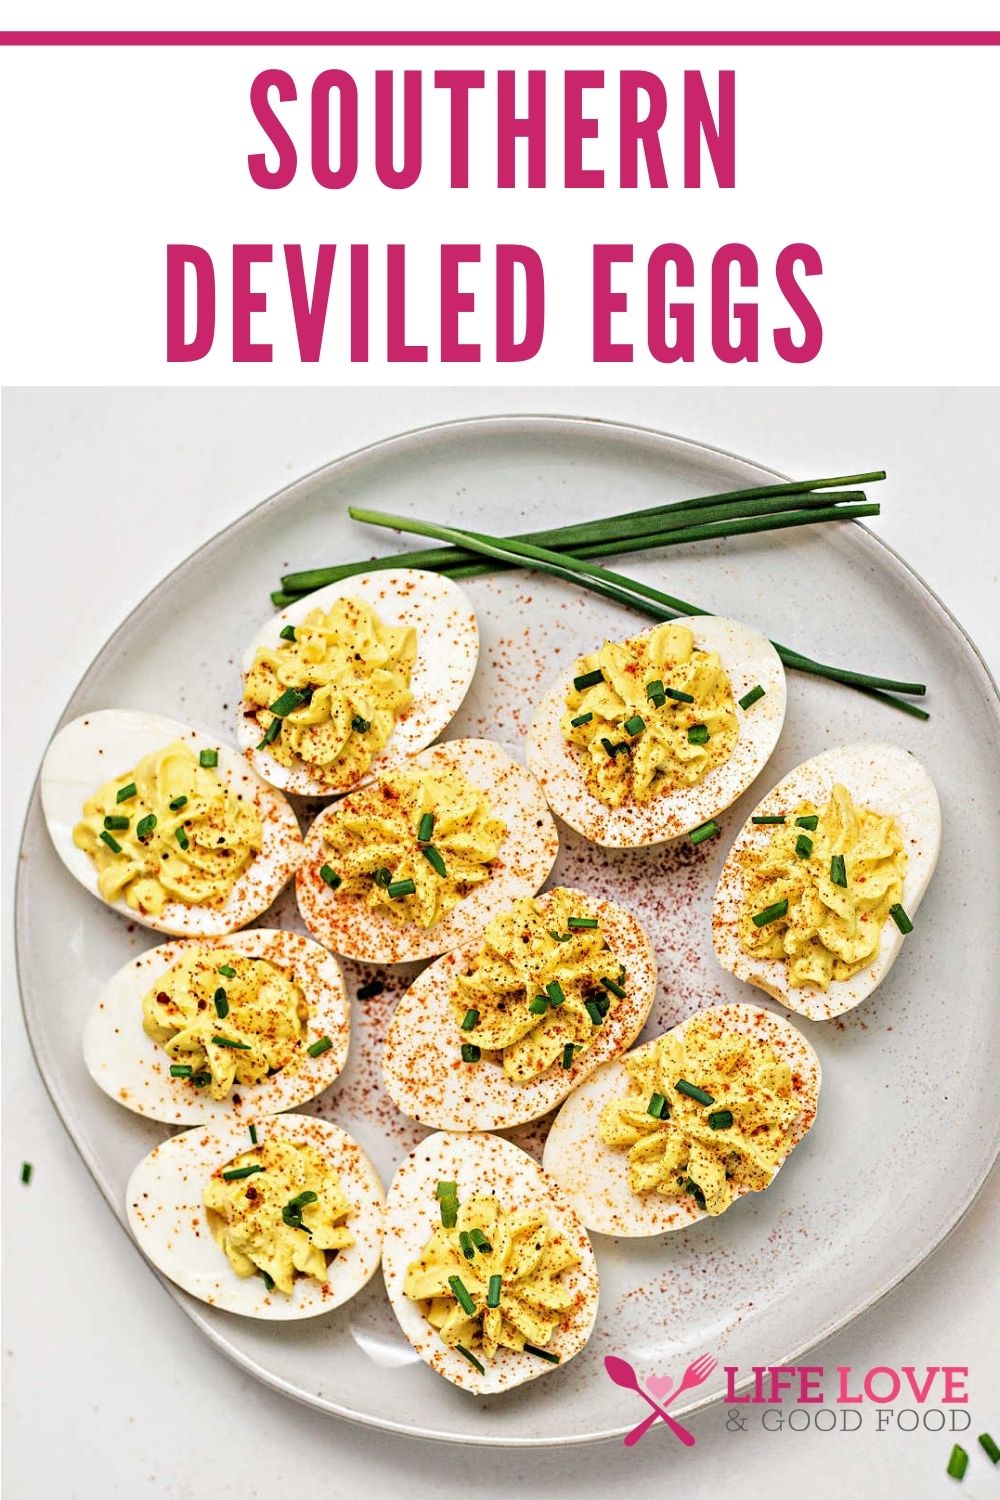 Southern Deviled Eggs - Life, Love, and Good Food